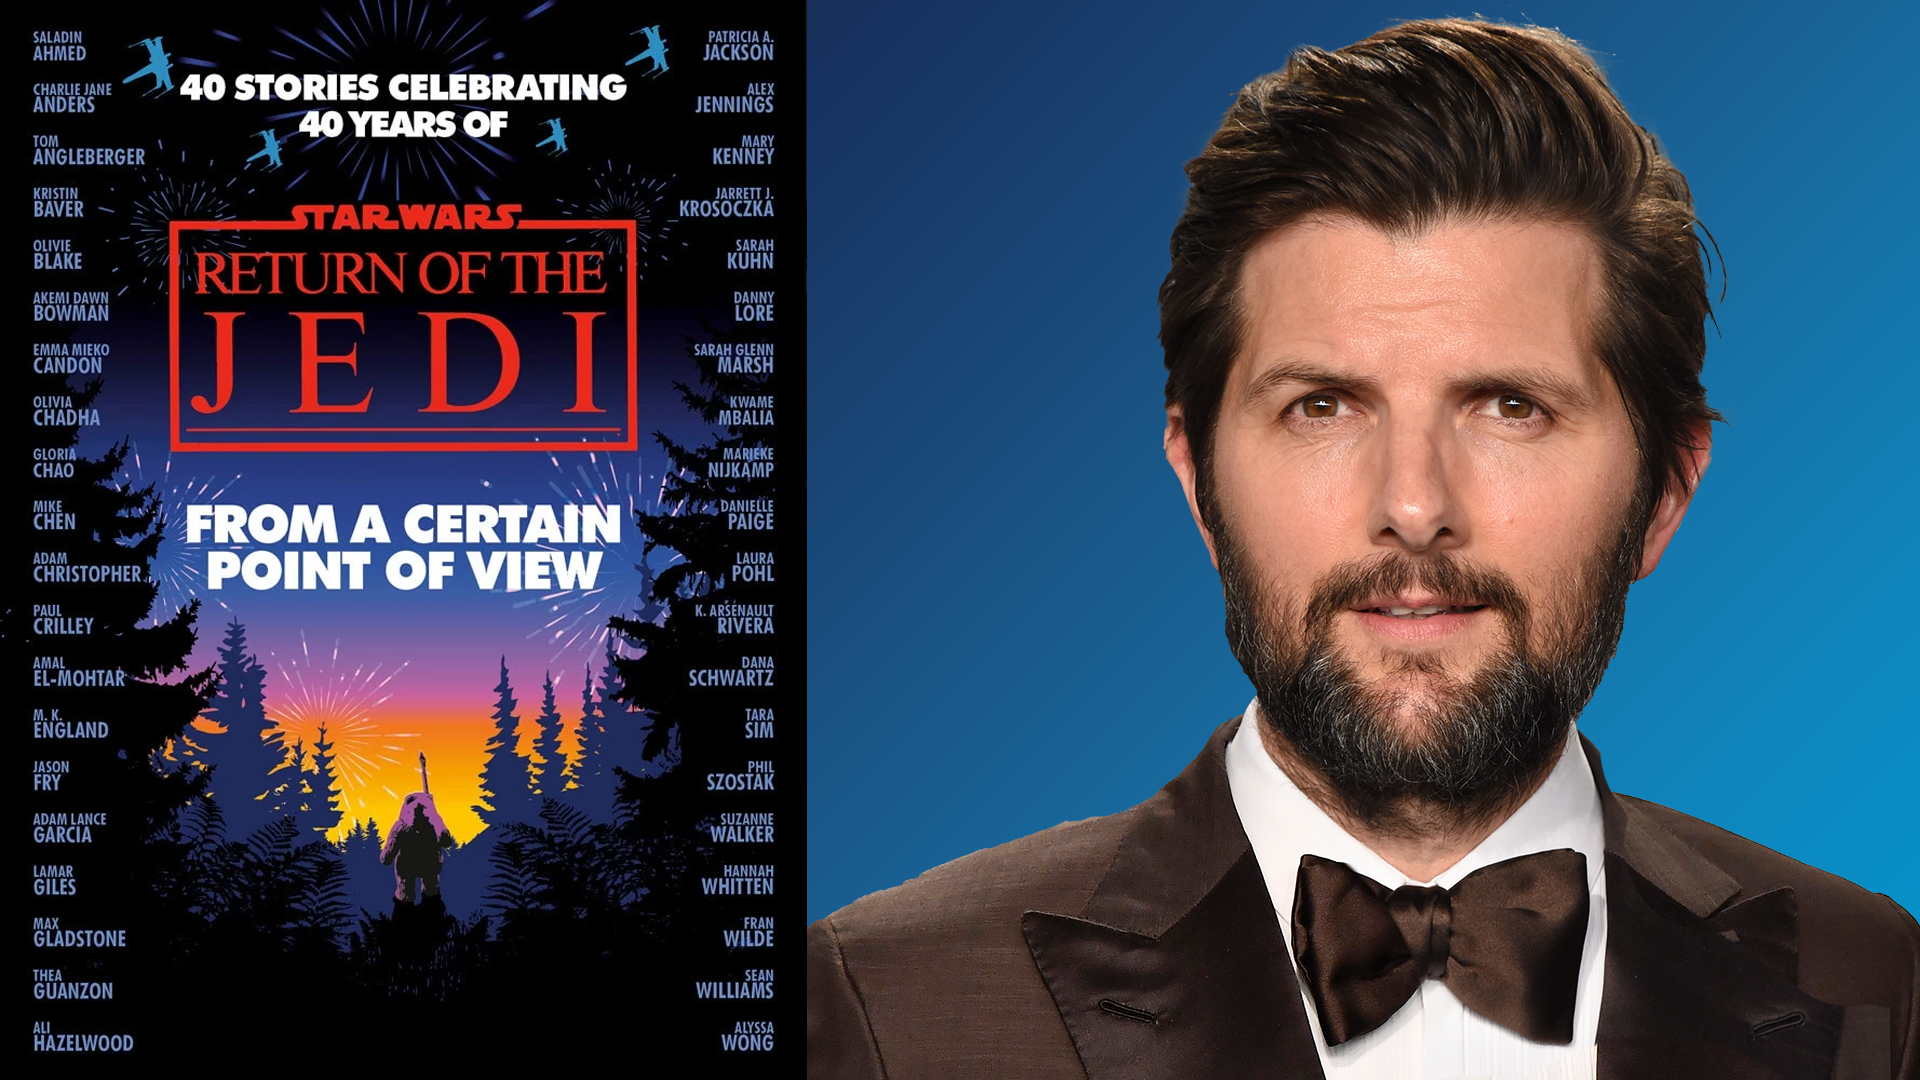 From a Certain Point of View Adam Scott